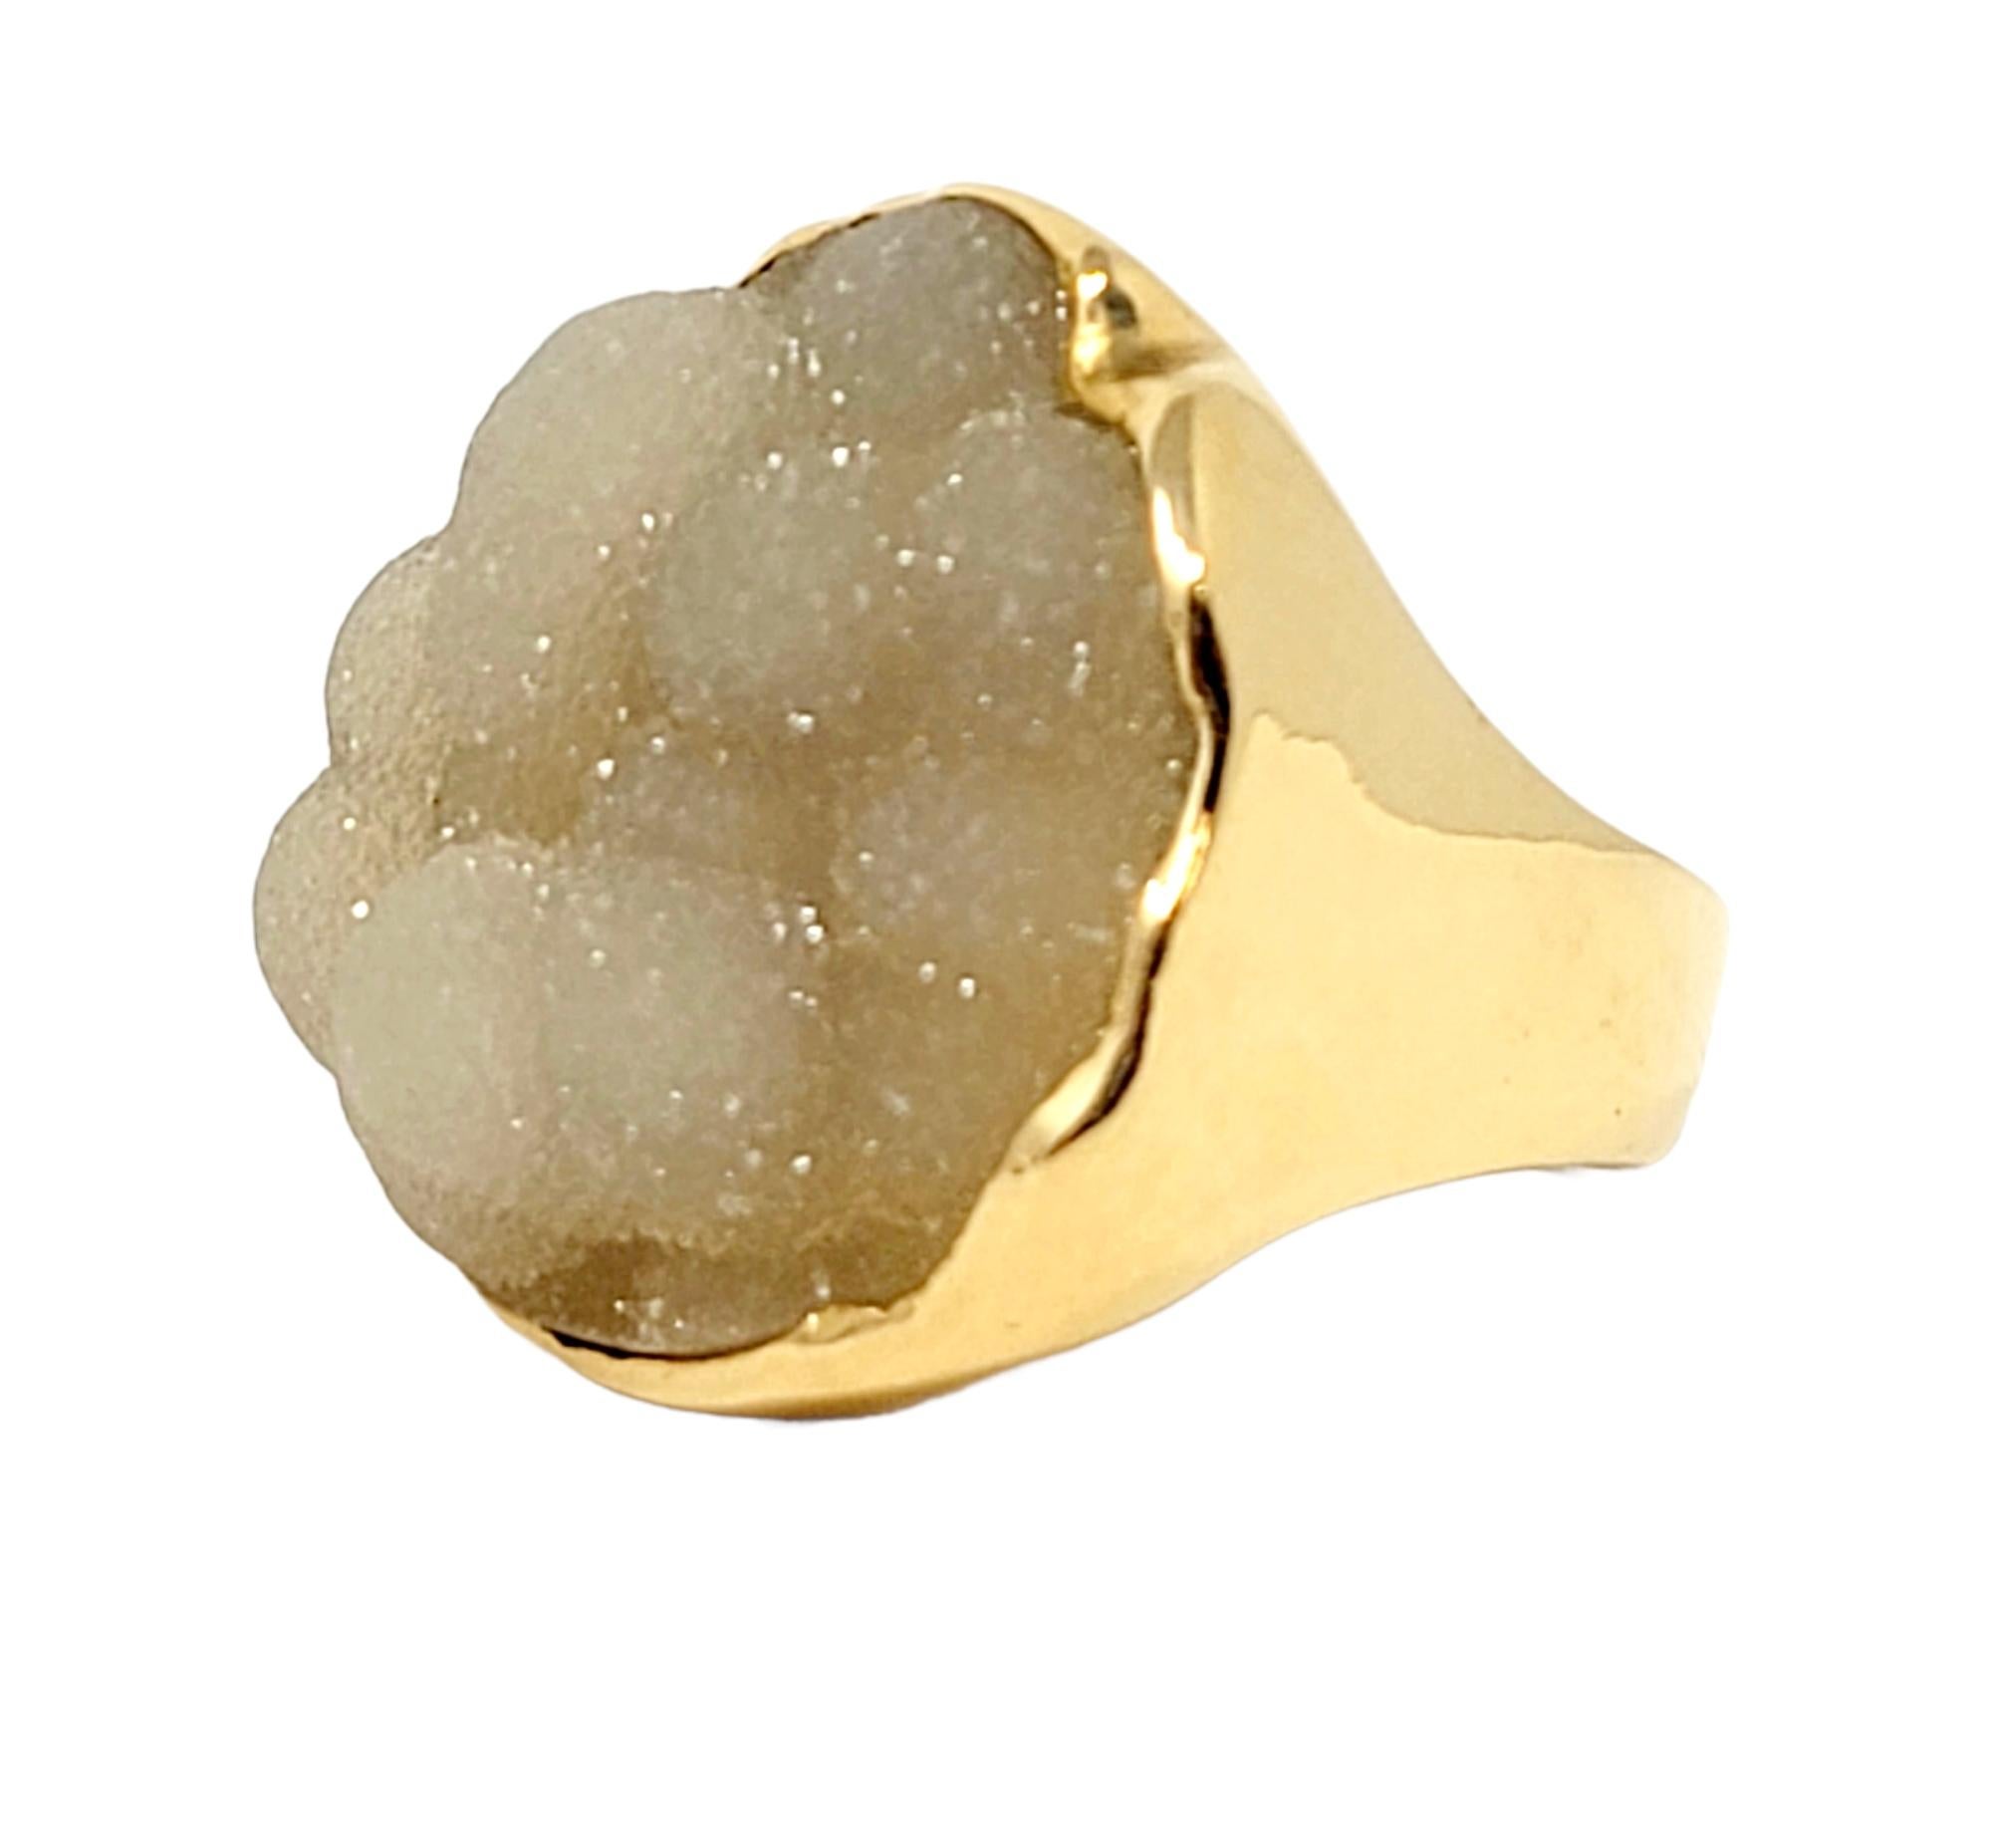 Rough Cut Opaque Gray Botryoidal Agate Cocktail Ring 18 Karat Yellow Gold 6.75 In Good Condition For Sale In Scottsdale, AZ